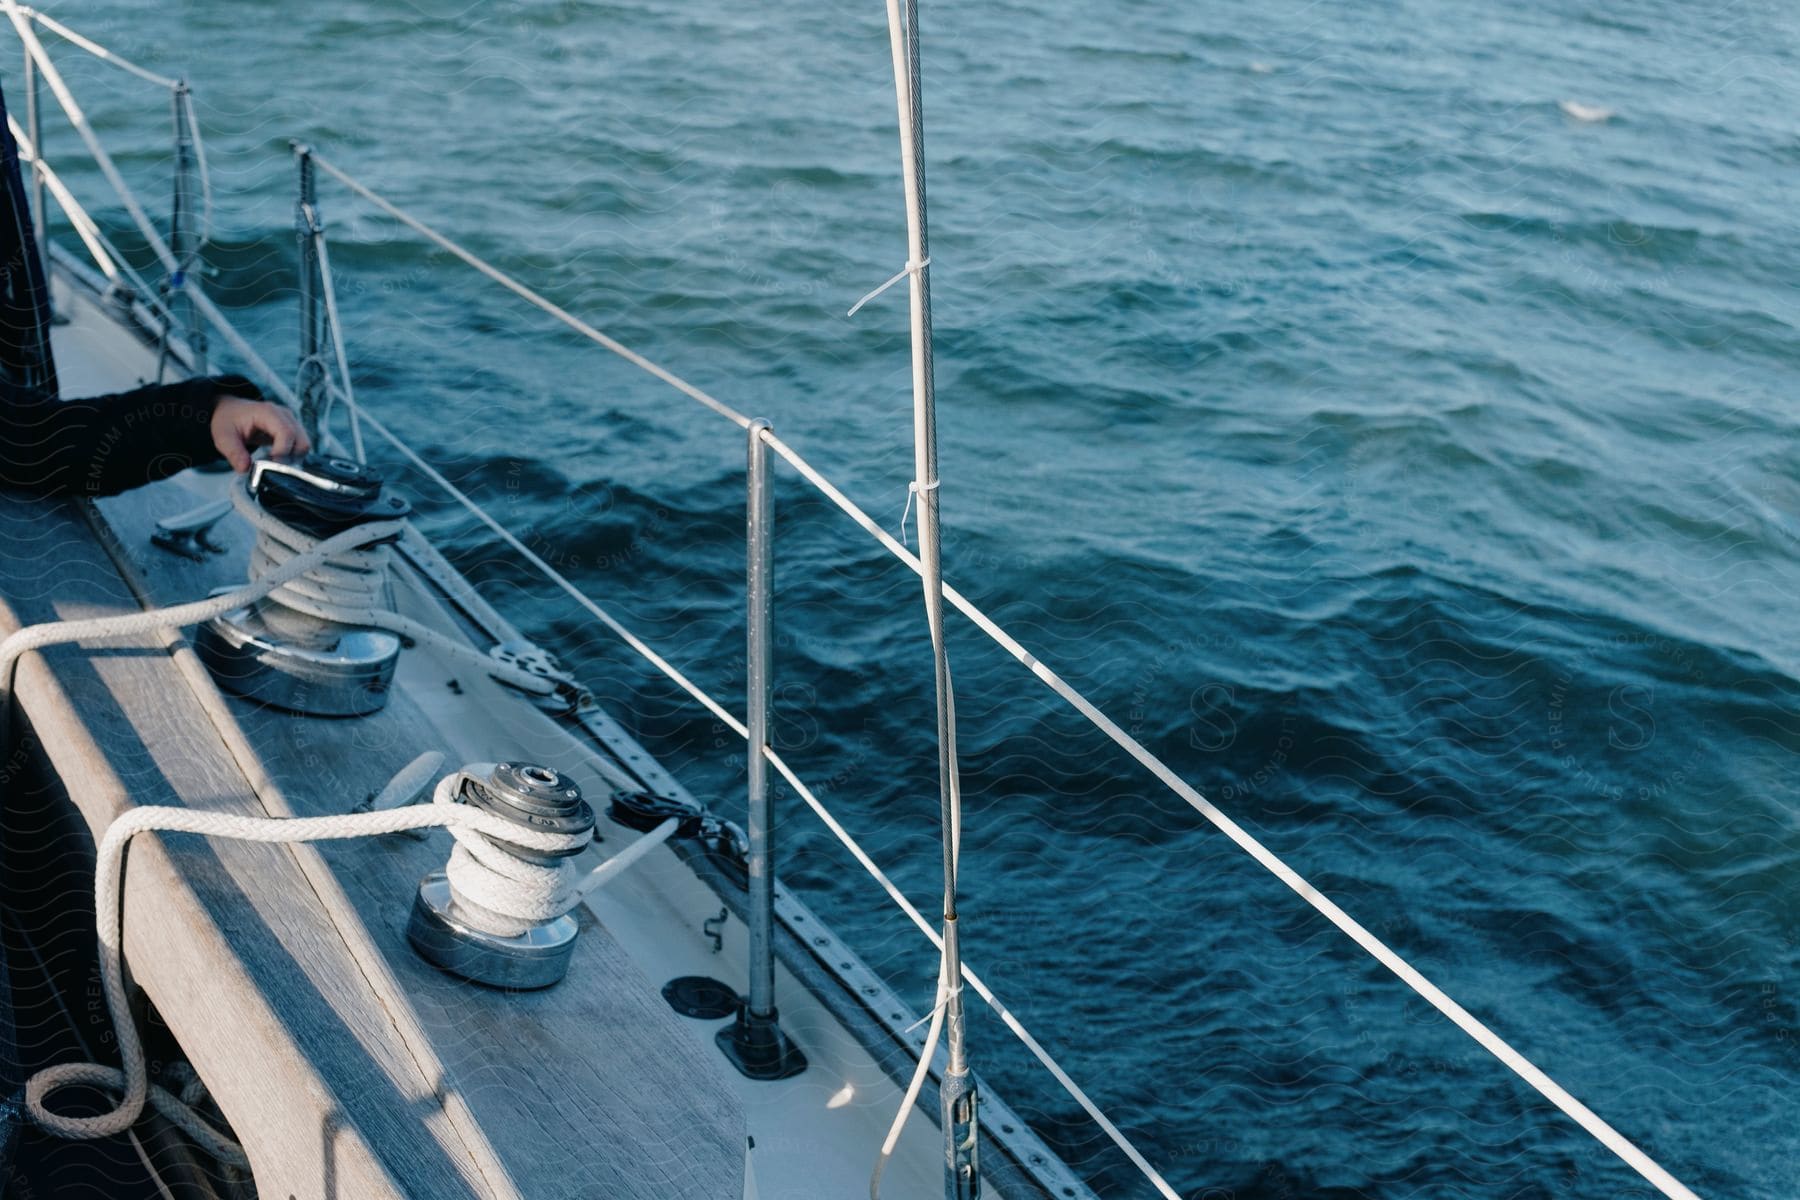 A person's hand is near rope on the side deck of a boat